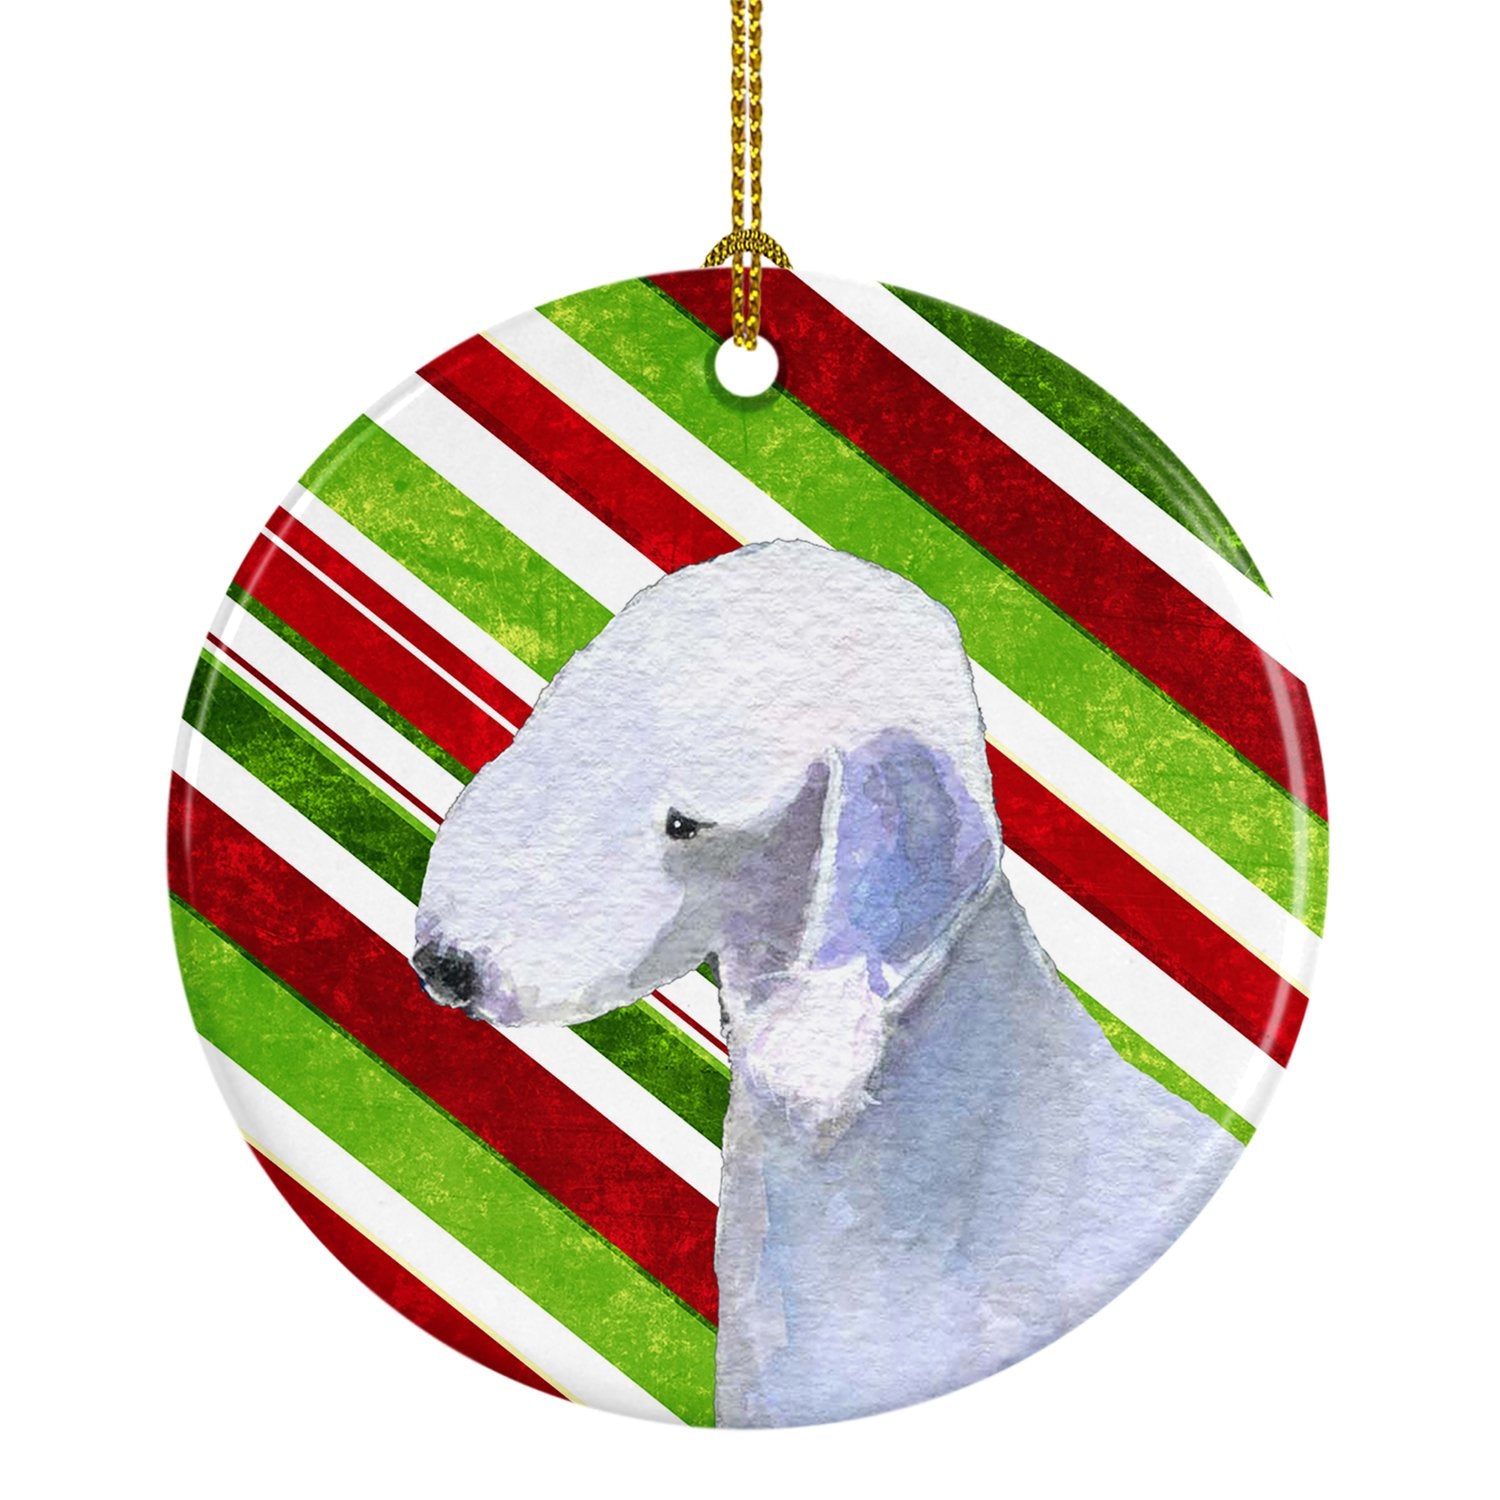 Bedlington Terrier Candy Cane Holiday Christmas Ceramic Ornament SS4552 by Caroline's Treasures